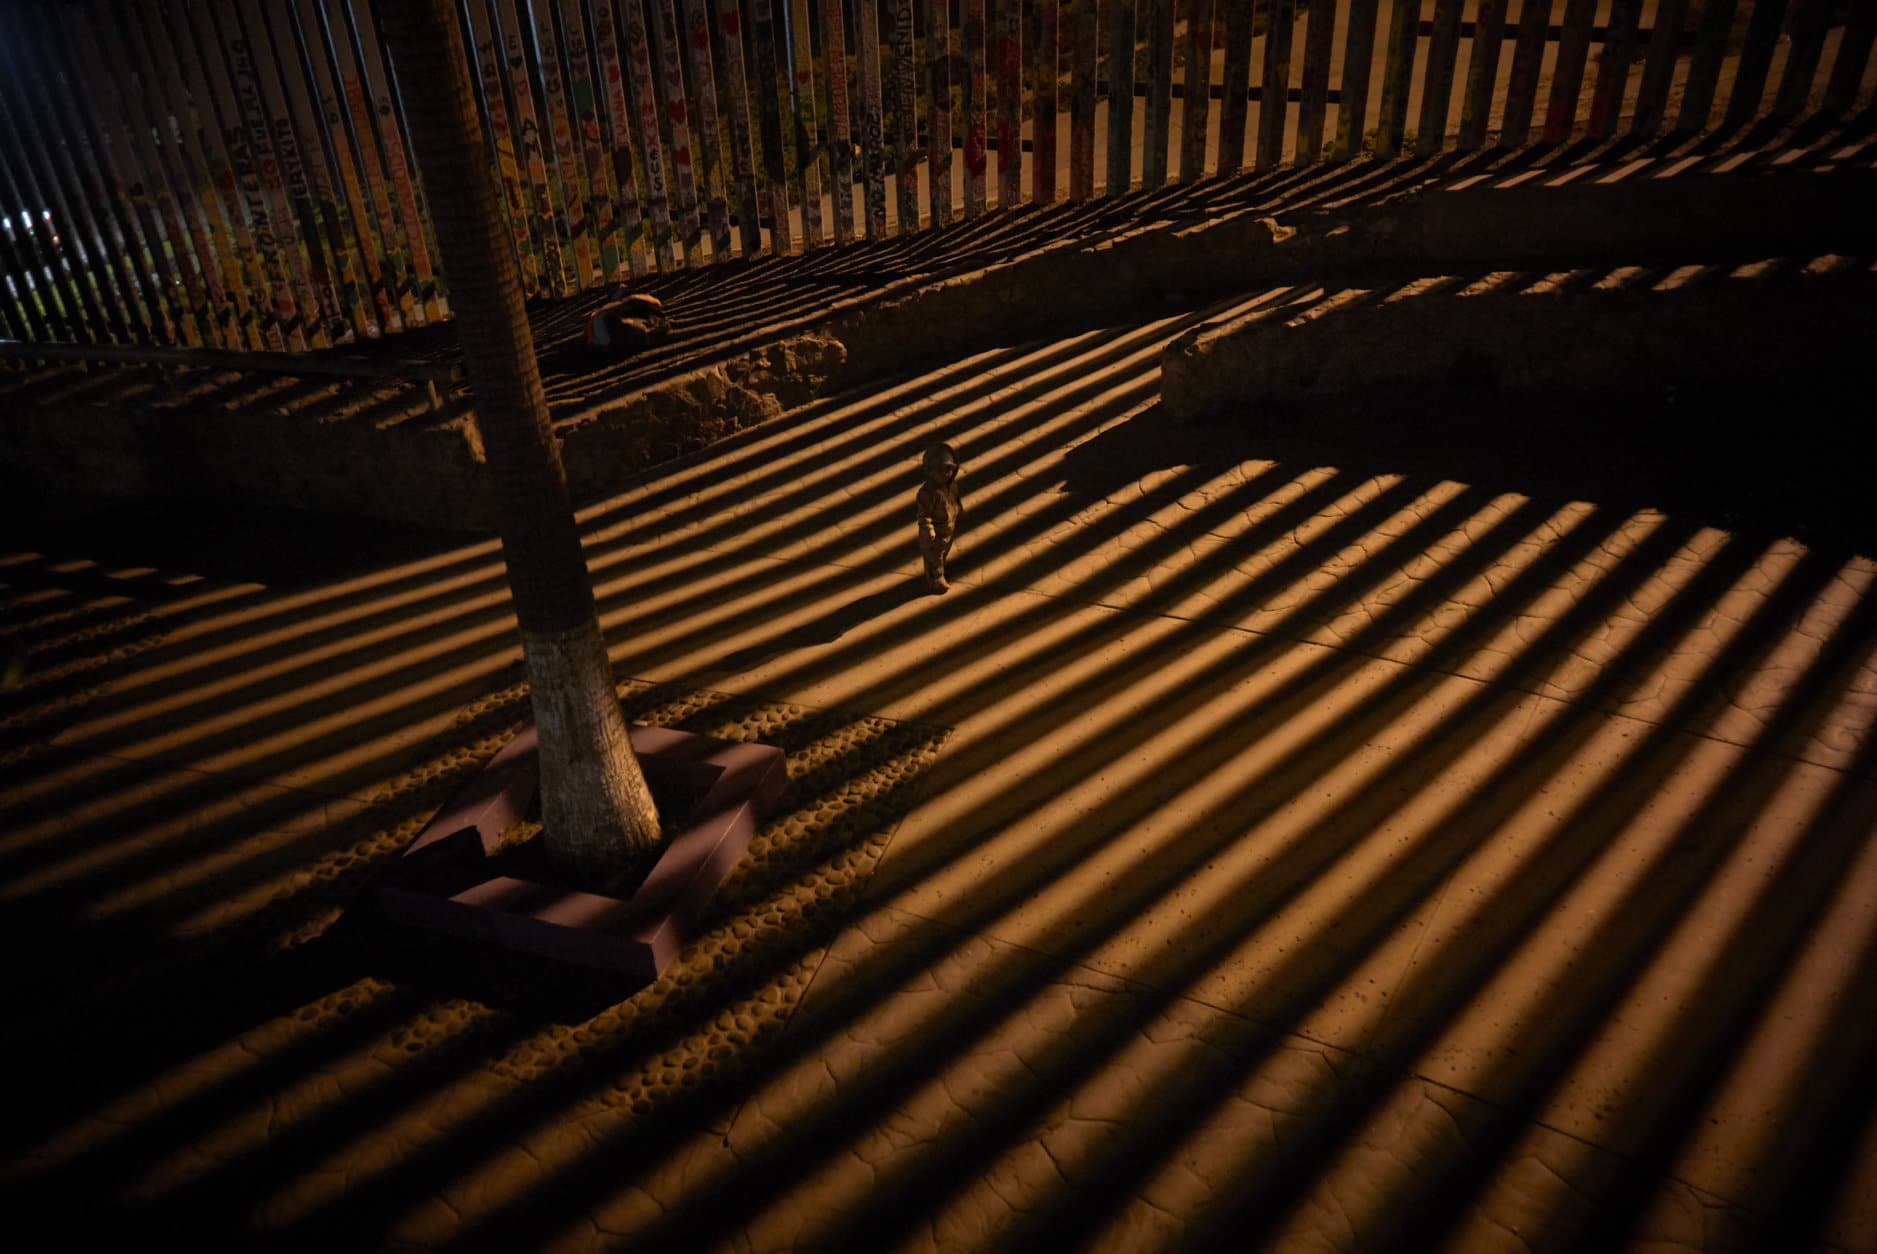 A boy plays as floodlights from the United States filter through the border wall Friday, Jan. 11, 2019, in Tijuana, Mexico. The partial U.S. government shutdown was on track Friday to become the longest closure in U.S. history as President Donald Trump and nervous Republicans look for a way out of the mess. A solution couldn't come soon enough for federal workers who got pay statements Friday but no pay. (AP Photo/Gregory Bull)